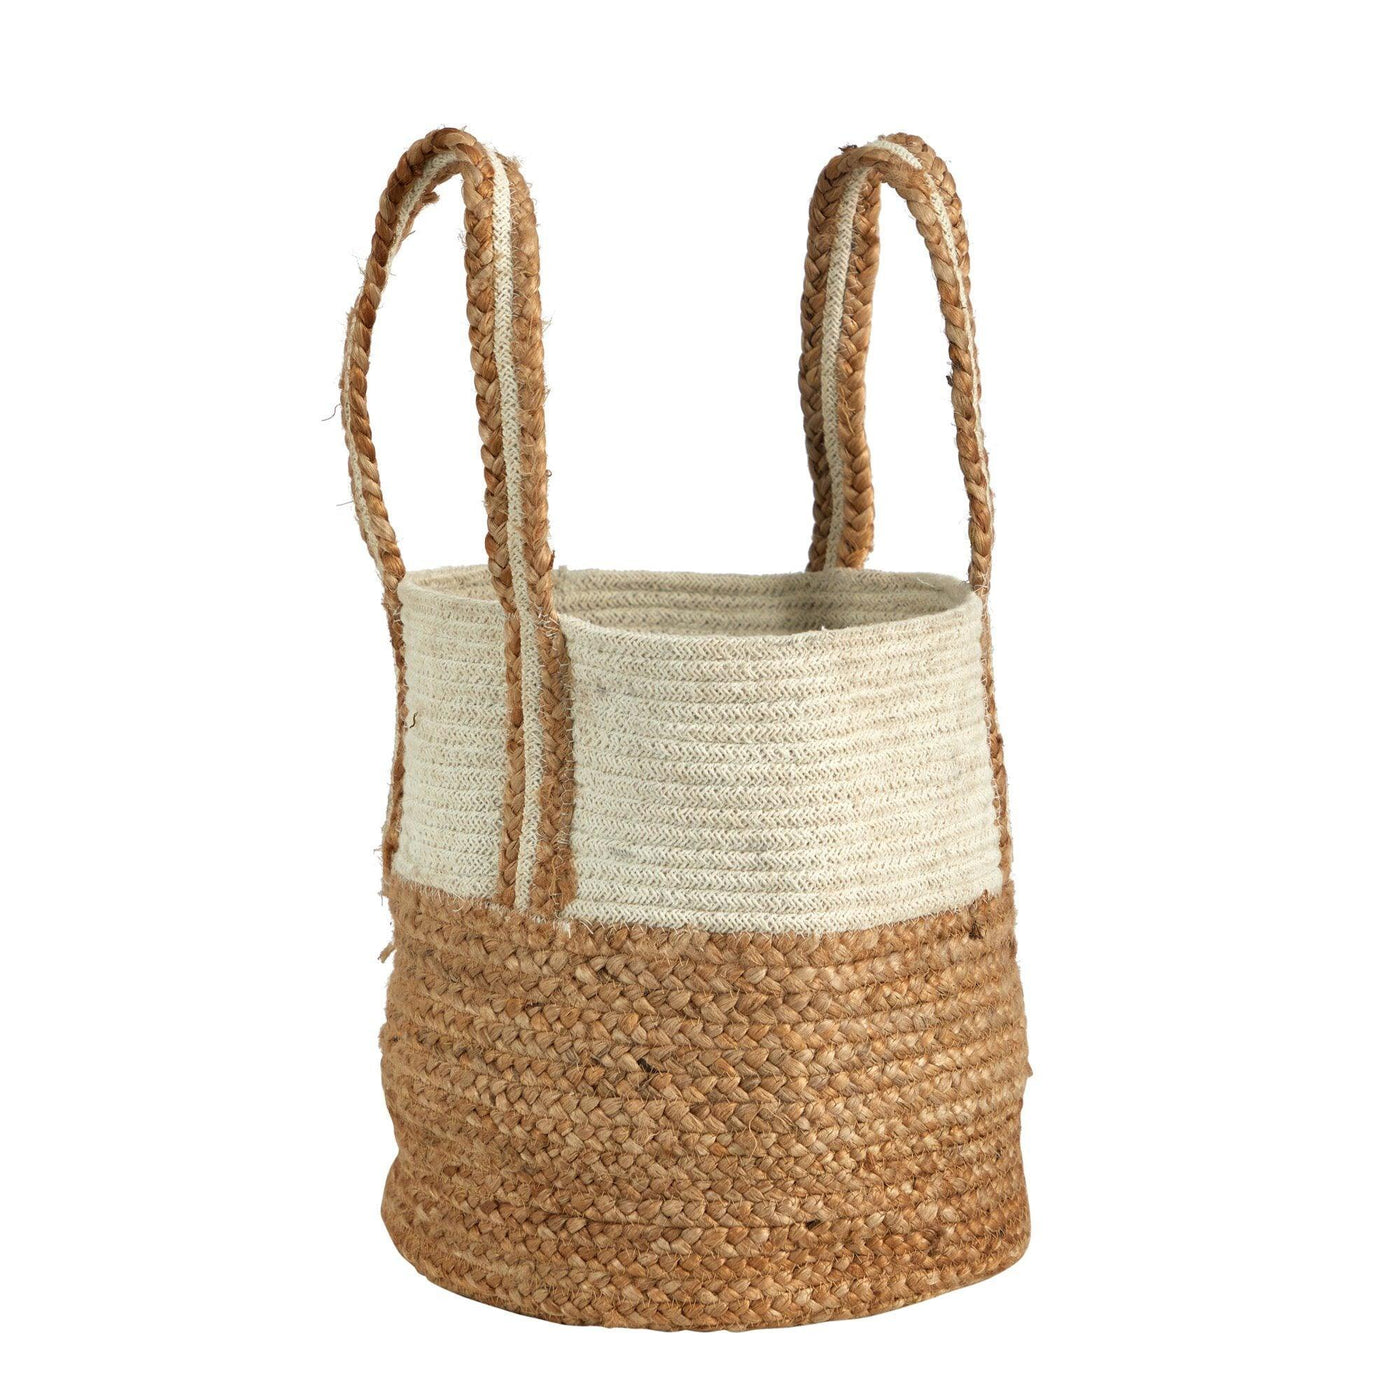 14” Boho Chic Basket Natural Cotton and Jute with Handles by Nearly Natural - Vysn